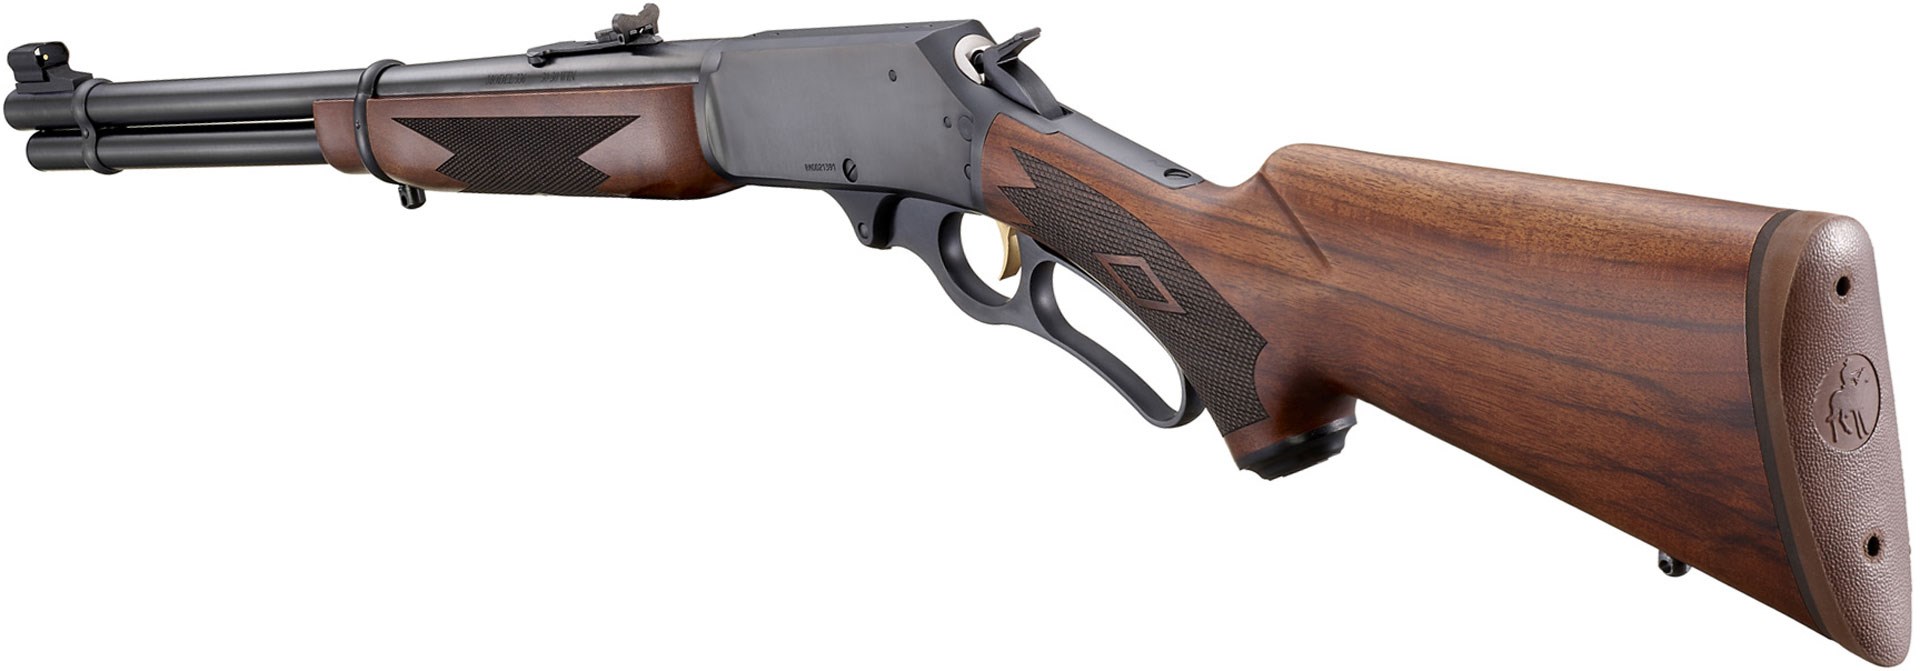 Review: Marlin Model 336 Classic